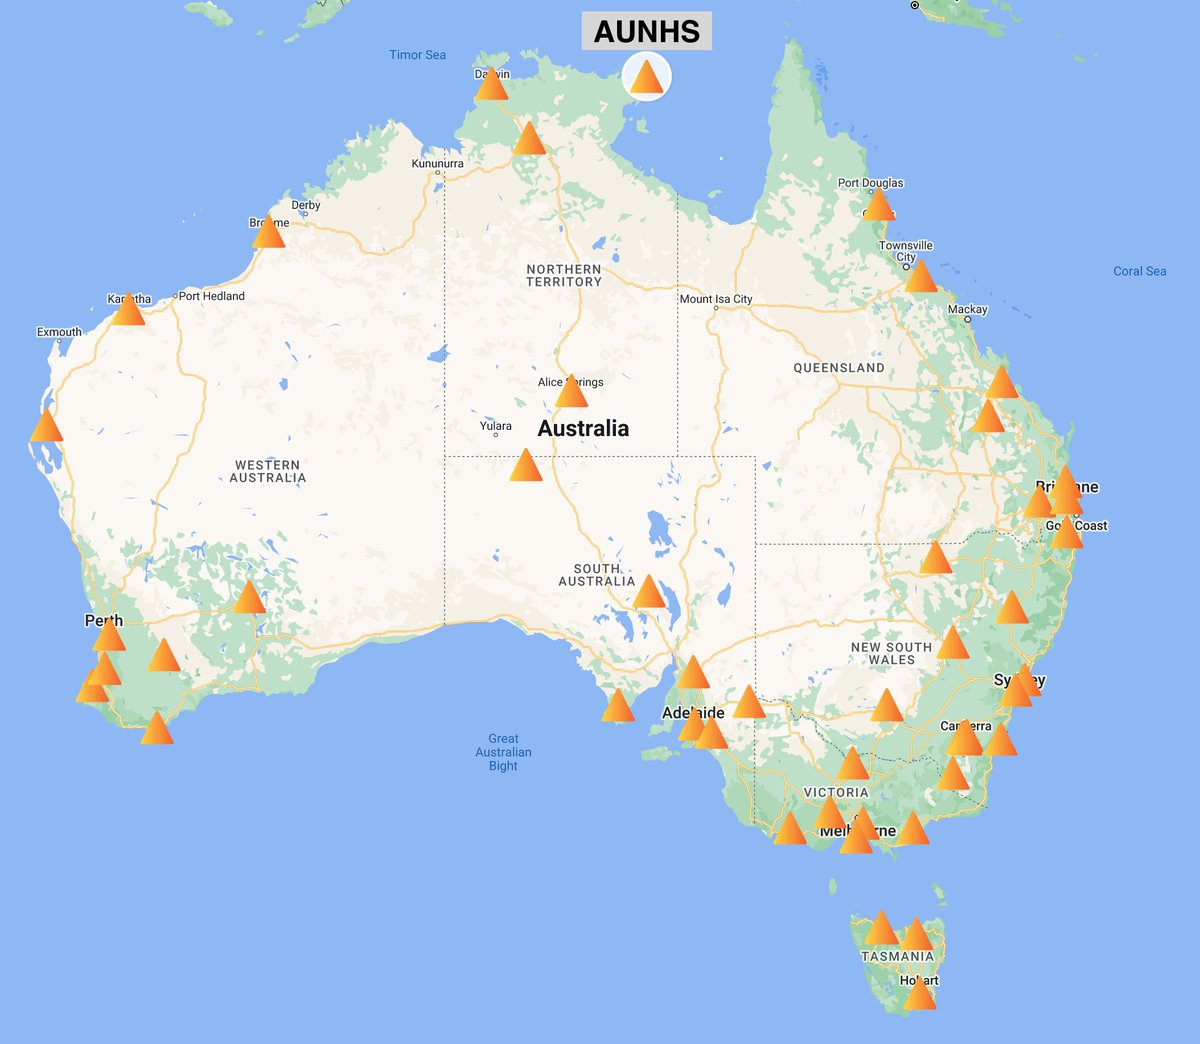 Exciting news! Our site in #Nhulunbuy, AUNHS, is now online 🌟 This station is the northernmost #seismic station on mainland Australia, and its data is accessible through @AusPass . @AuScope